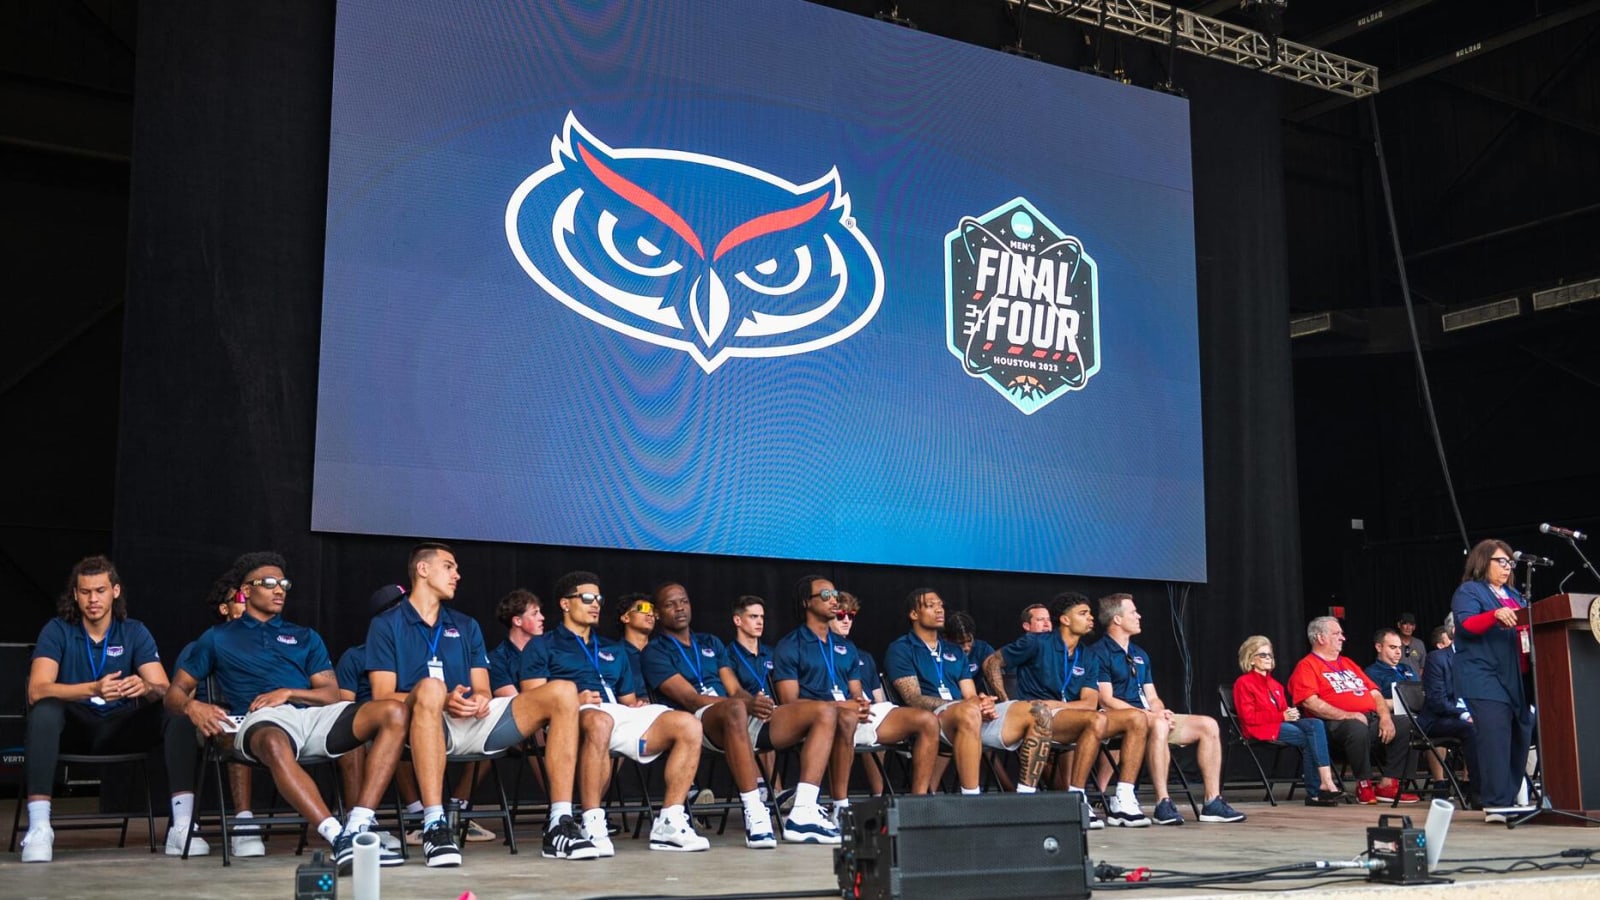 FAU Made a Cinderella Final Four Run. Their Athletic Department Donations Doubled